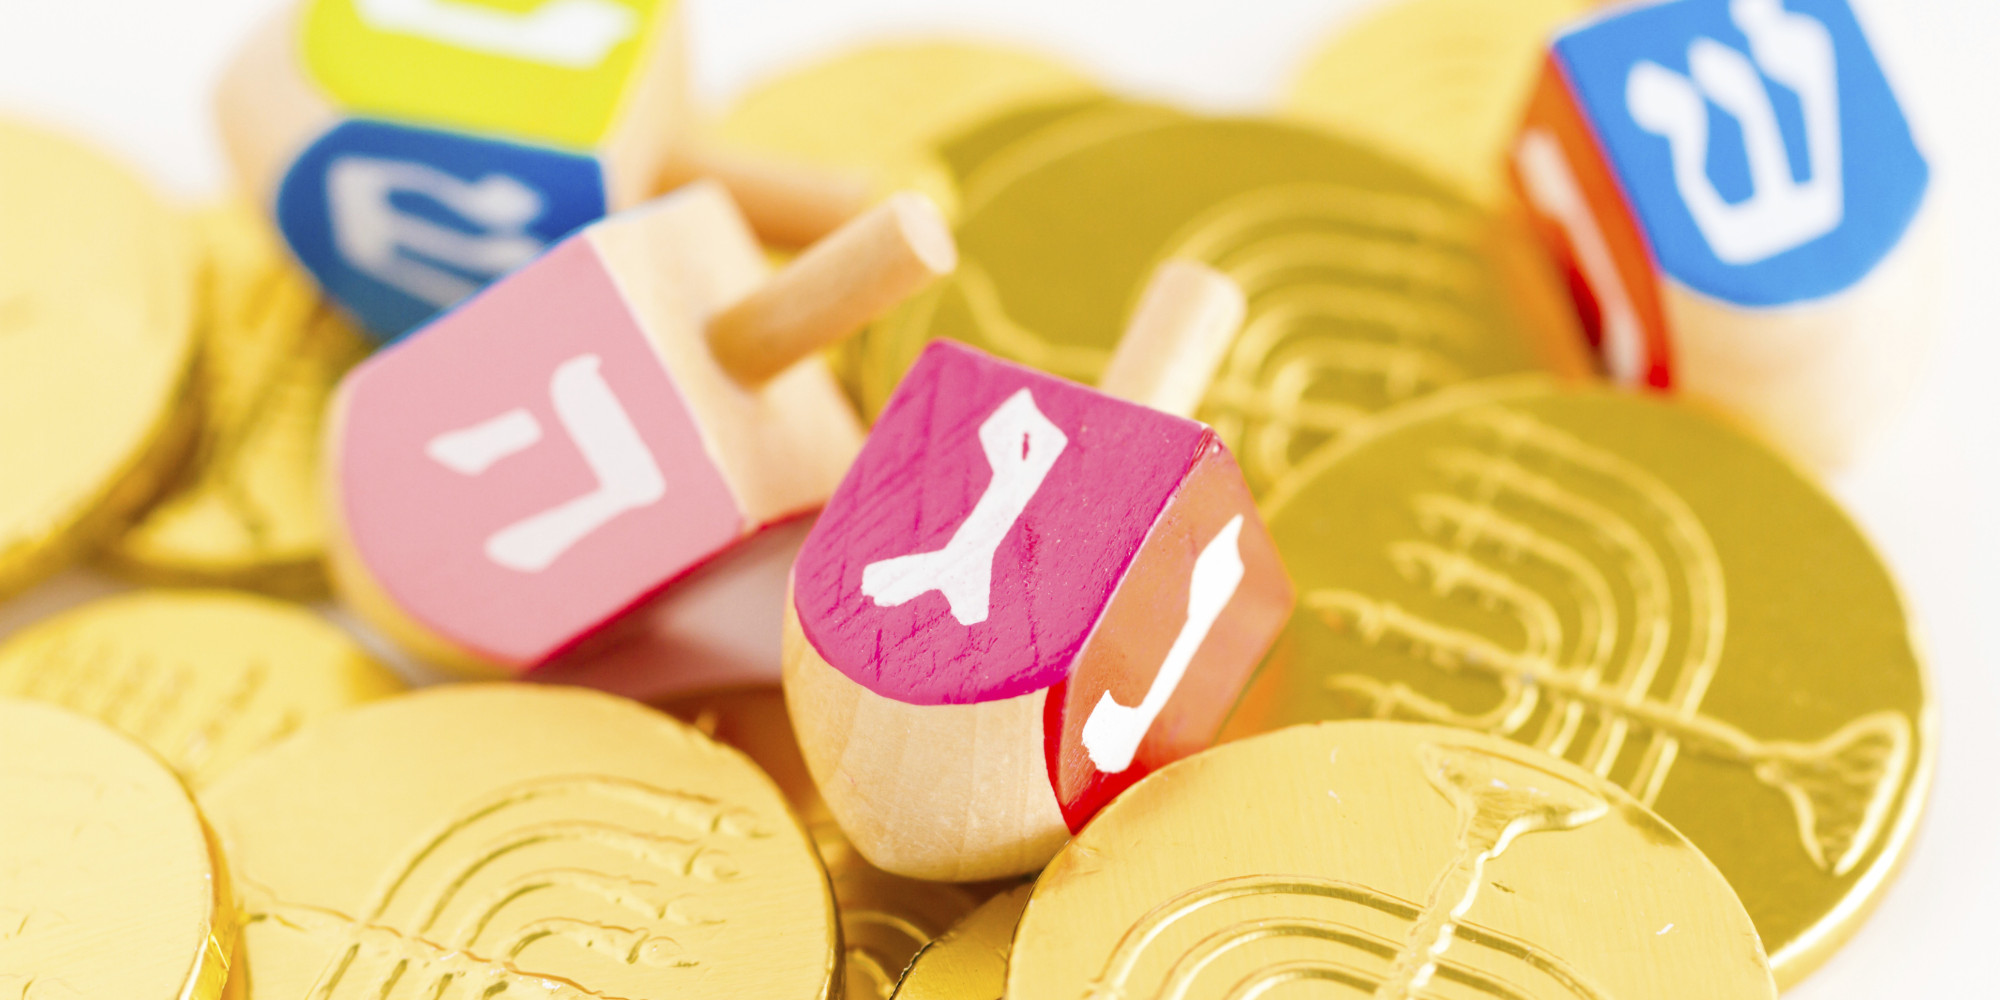 dreidel-decorations-for-hanukkah-and-how-to-play-the-game